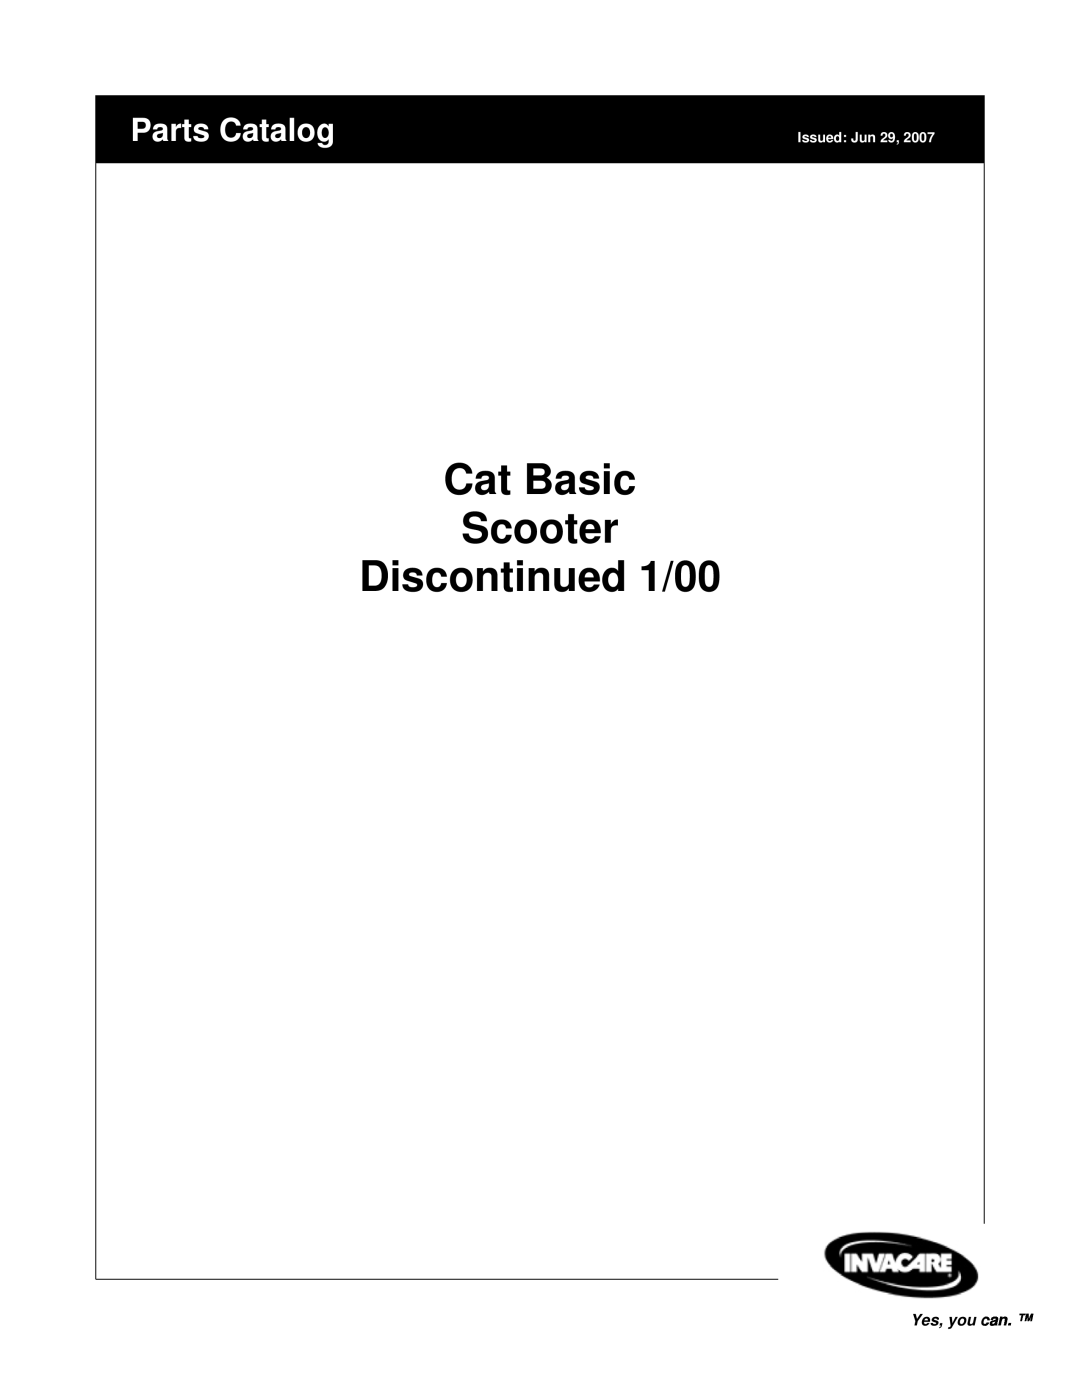 Invacare manual Cat Basic Scooter Discontinued 1/00, Parts Catalog, Yes, you can, Issued Jun 29 